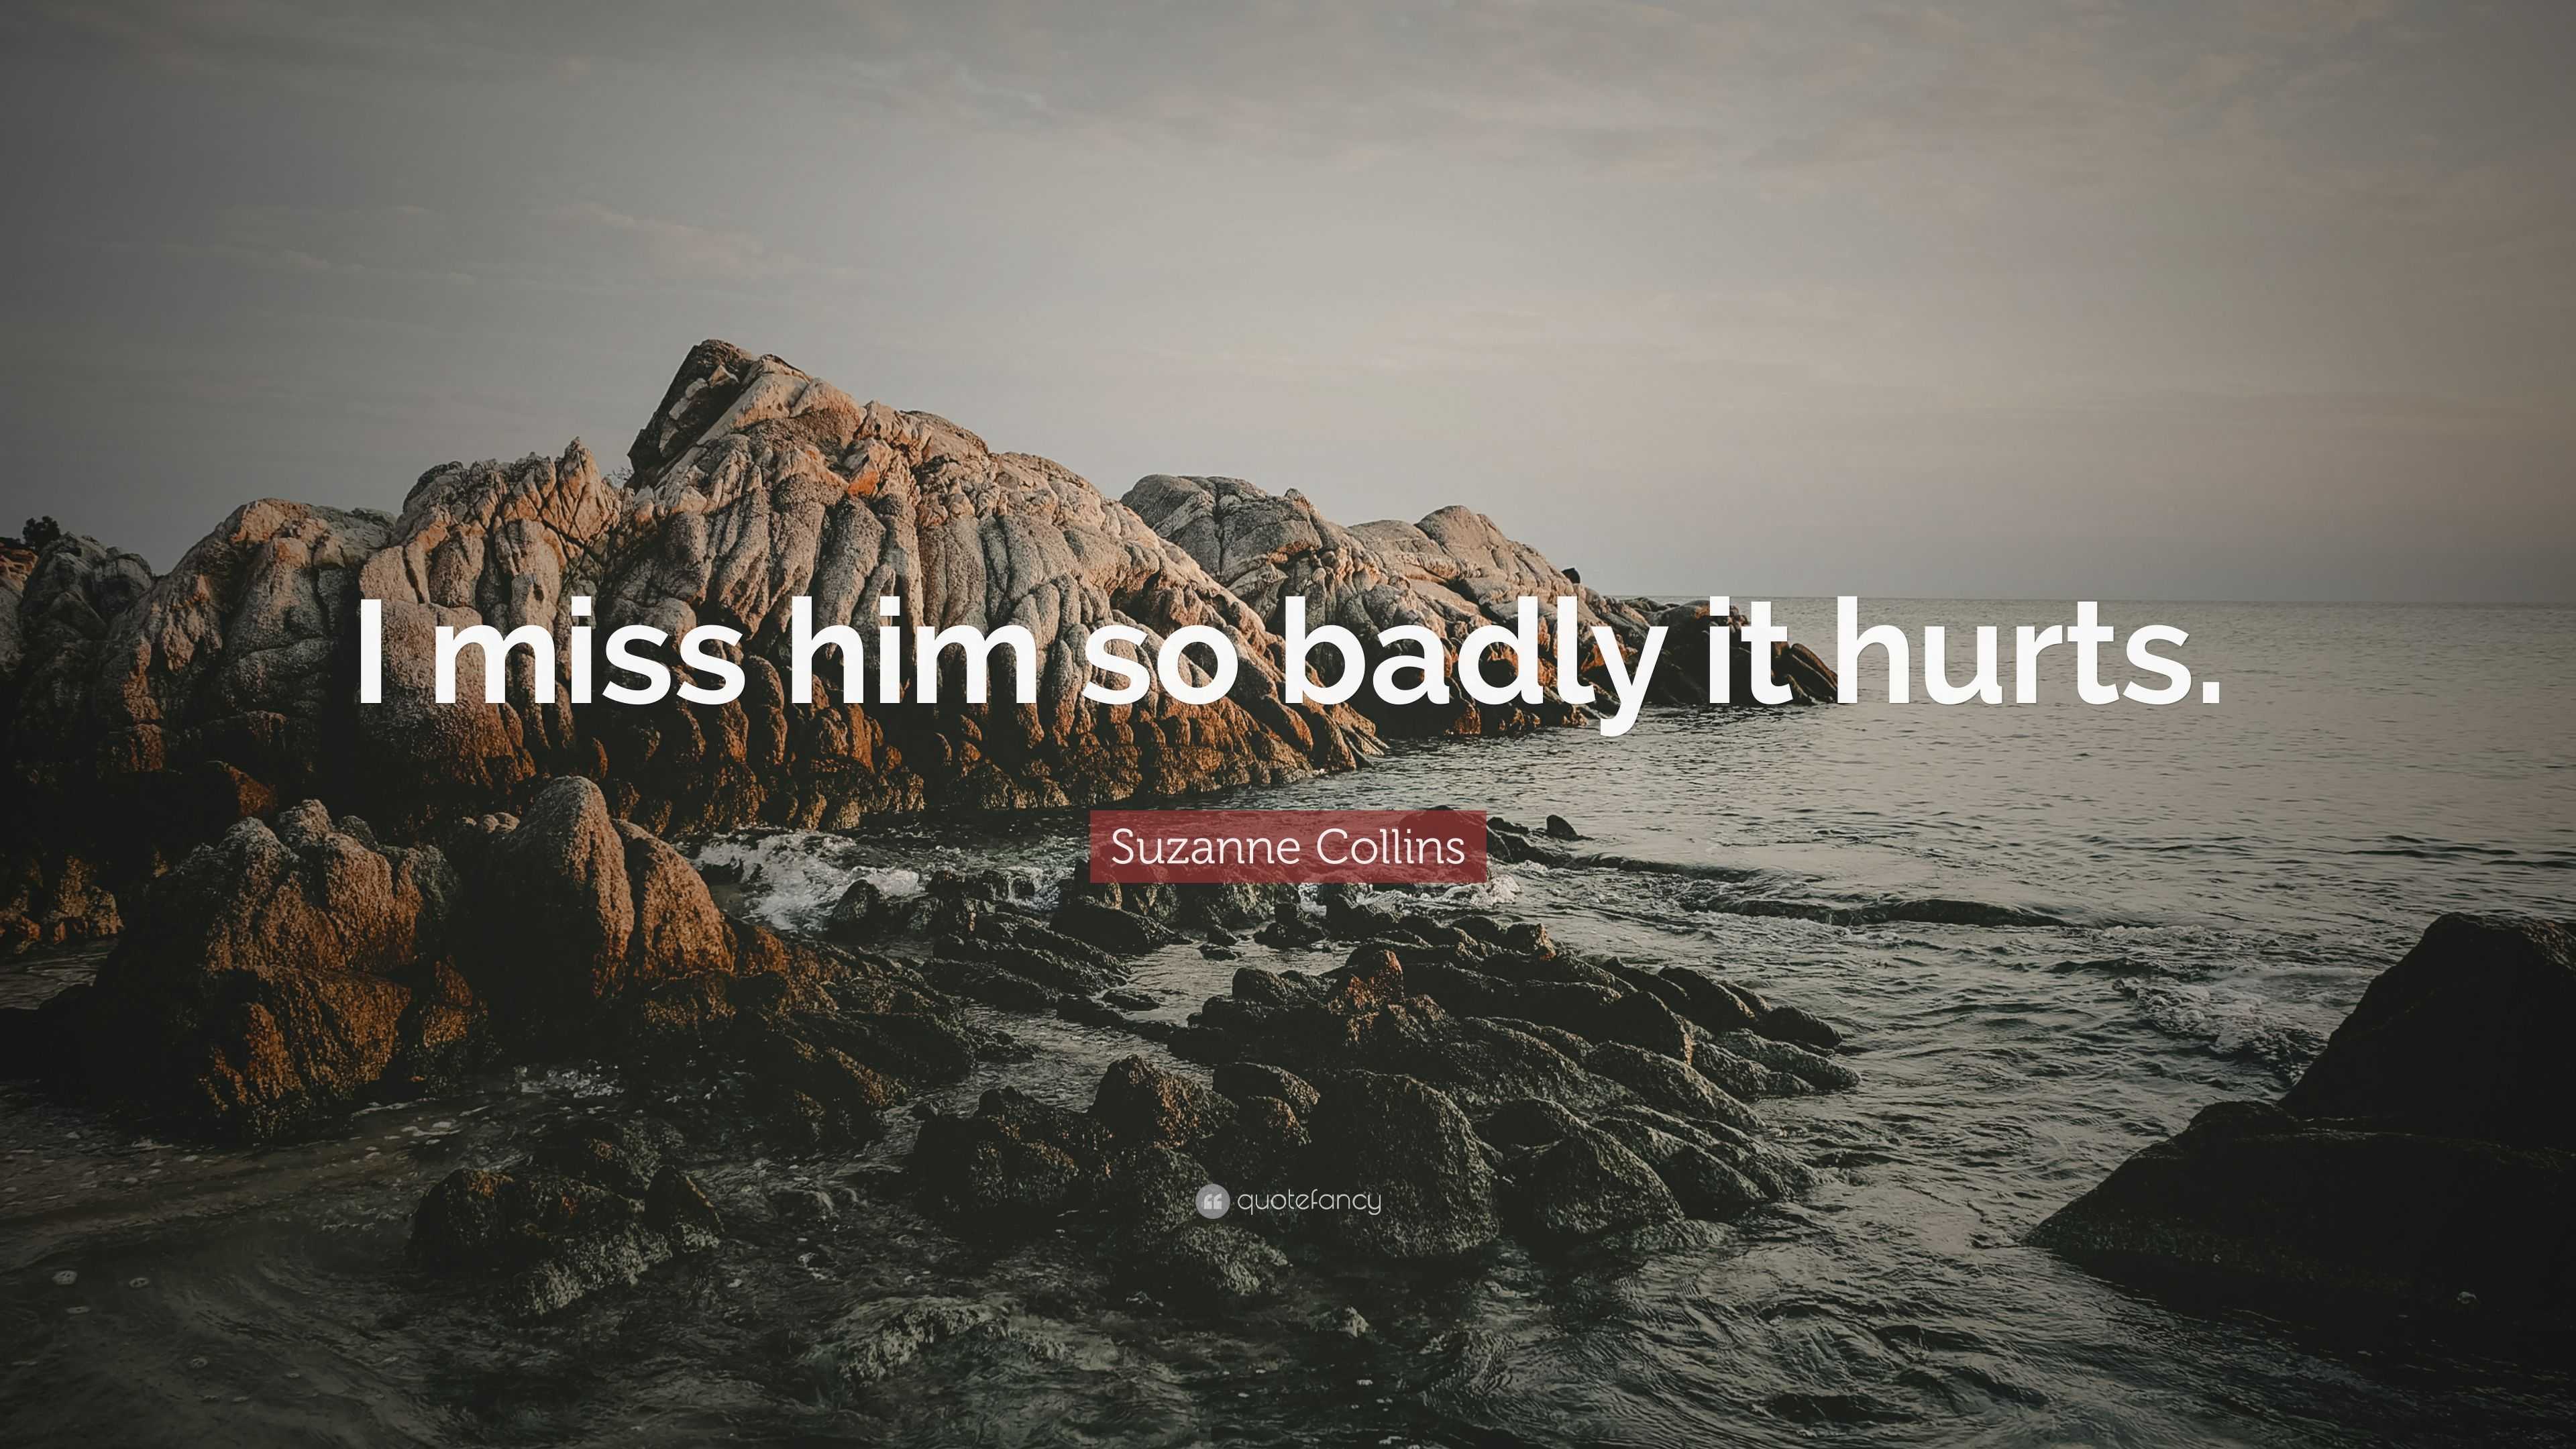 Suzanne Collins Quote: "I miss him so badly it hurts." (6 ...